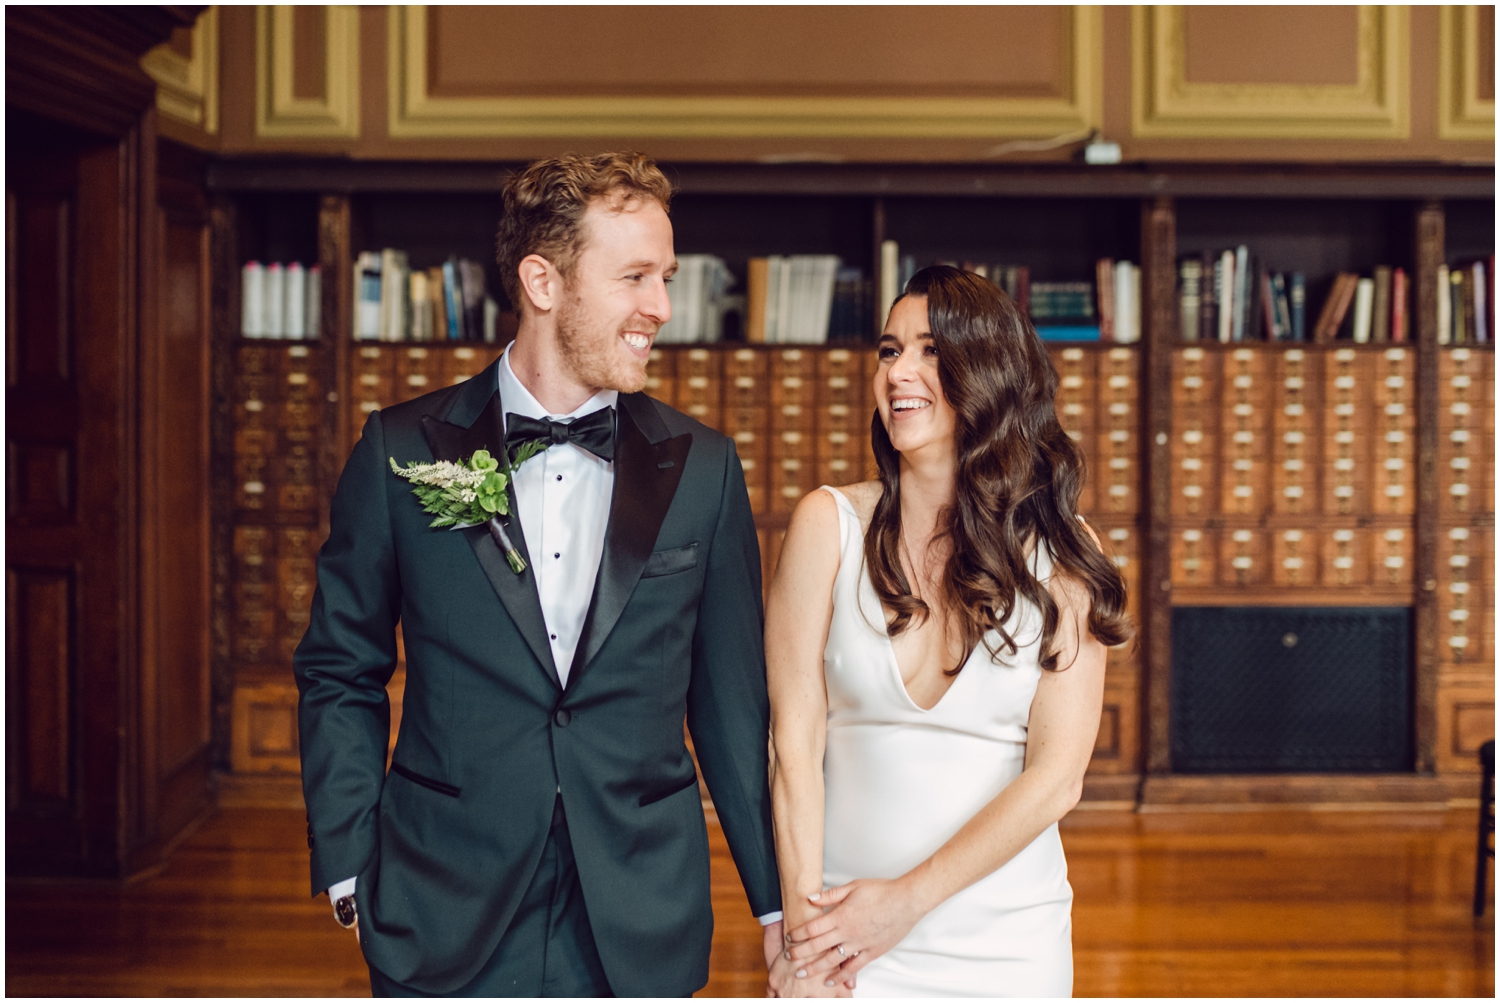 A bride and groom hold hands in front of a row of card catalogs at a Mutter Museum wedding.